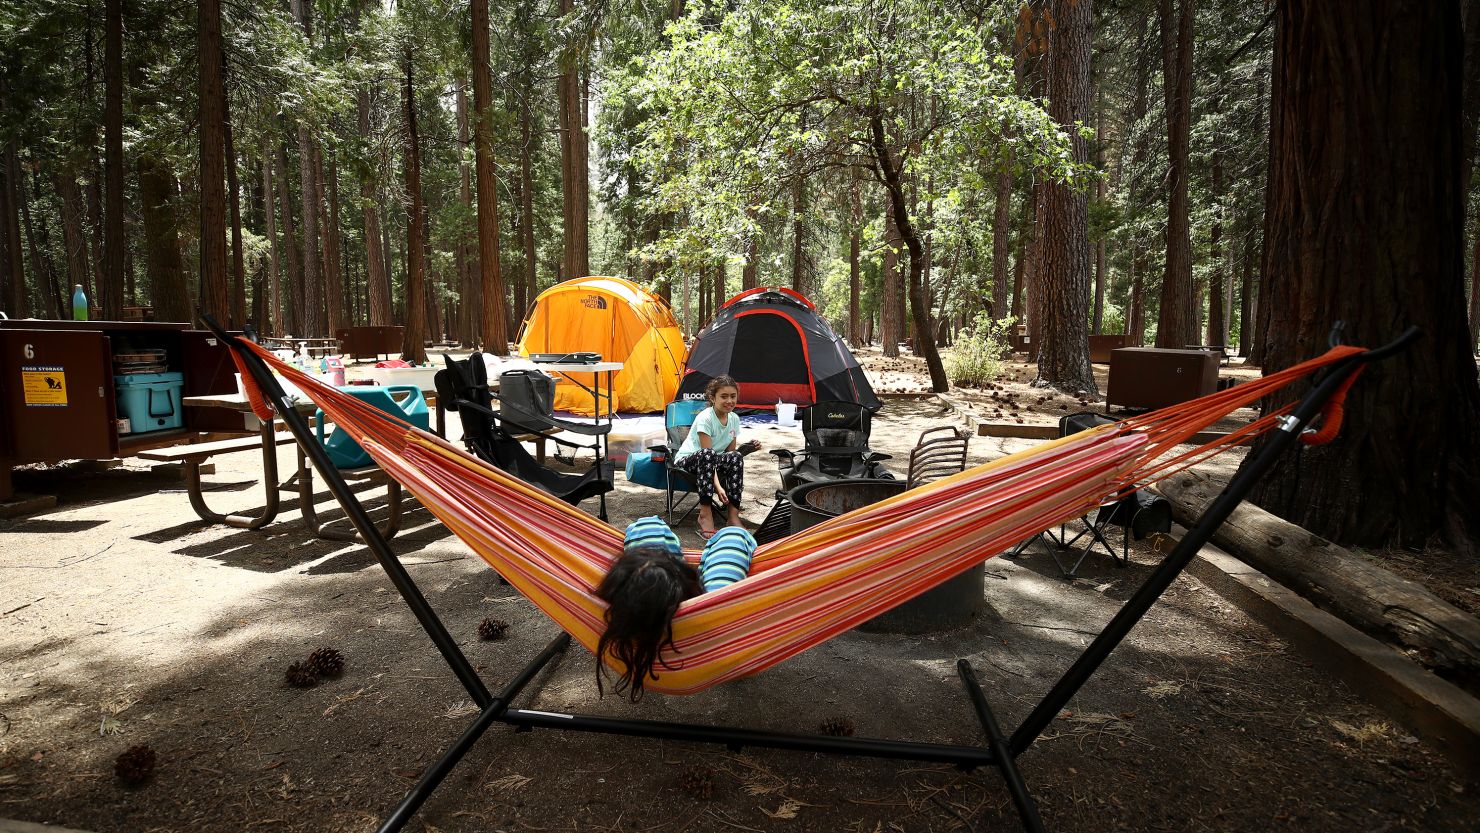 YOSEMITE NATIONAL PARK, CALIFORNIA - JUNE 11: Noah (in hammock) and Valentina Gonzalez from the Sacramento area relax in their campsite on June 11, 2020 in Yosemite National Park, California. Yosemite National Park reopened today with many restrictions after shutting down in March to protect people from COVID-19. Only about half of the average June visitors will be allowed in, and they must make an online reservation for each car. The park will issue 1,700 day passes each day and an additional 1,900 passes for reservations at campsites or hotels in the park. (Photo by Ezra Shaw/Getty Images)